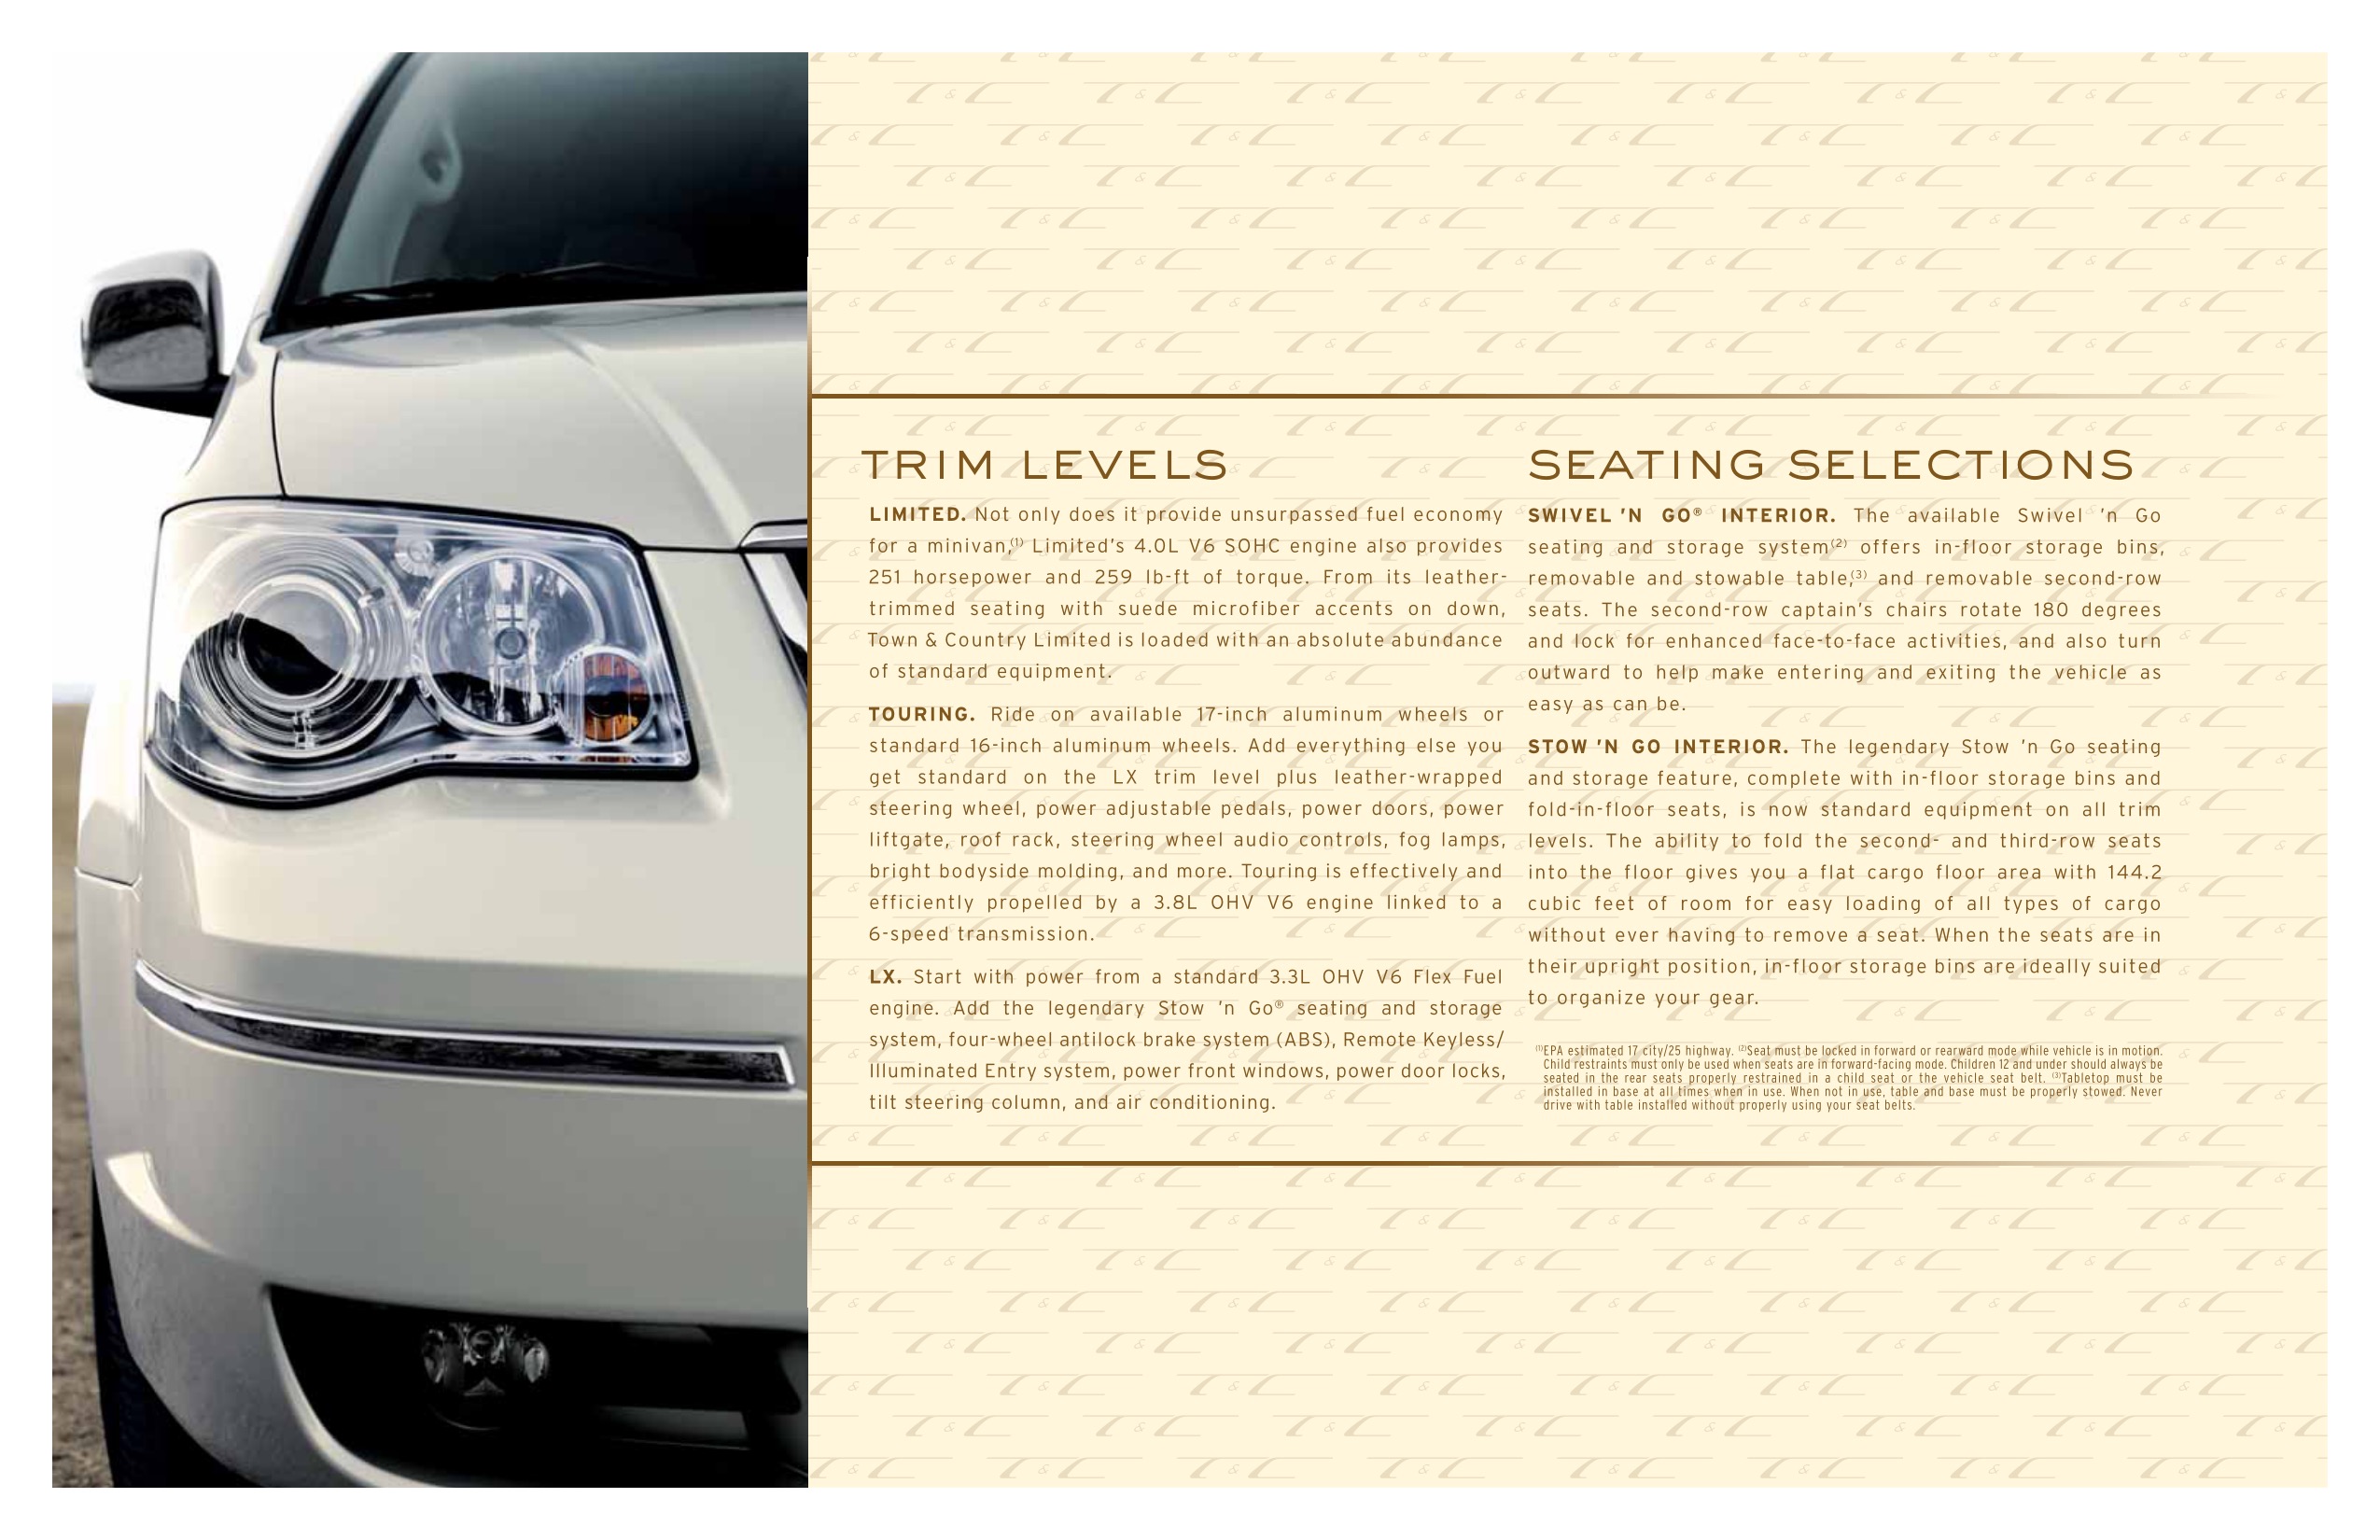 2010 Chrysler Town & Country Brochure Page 28